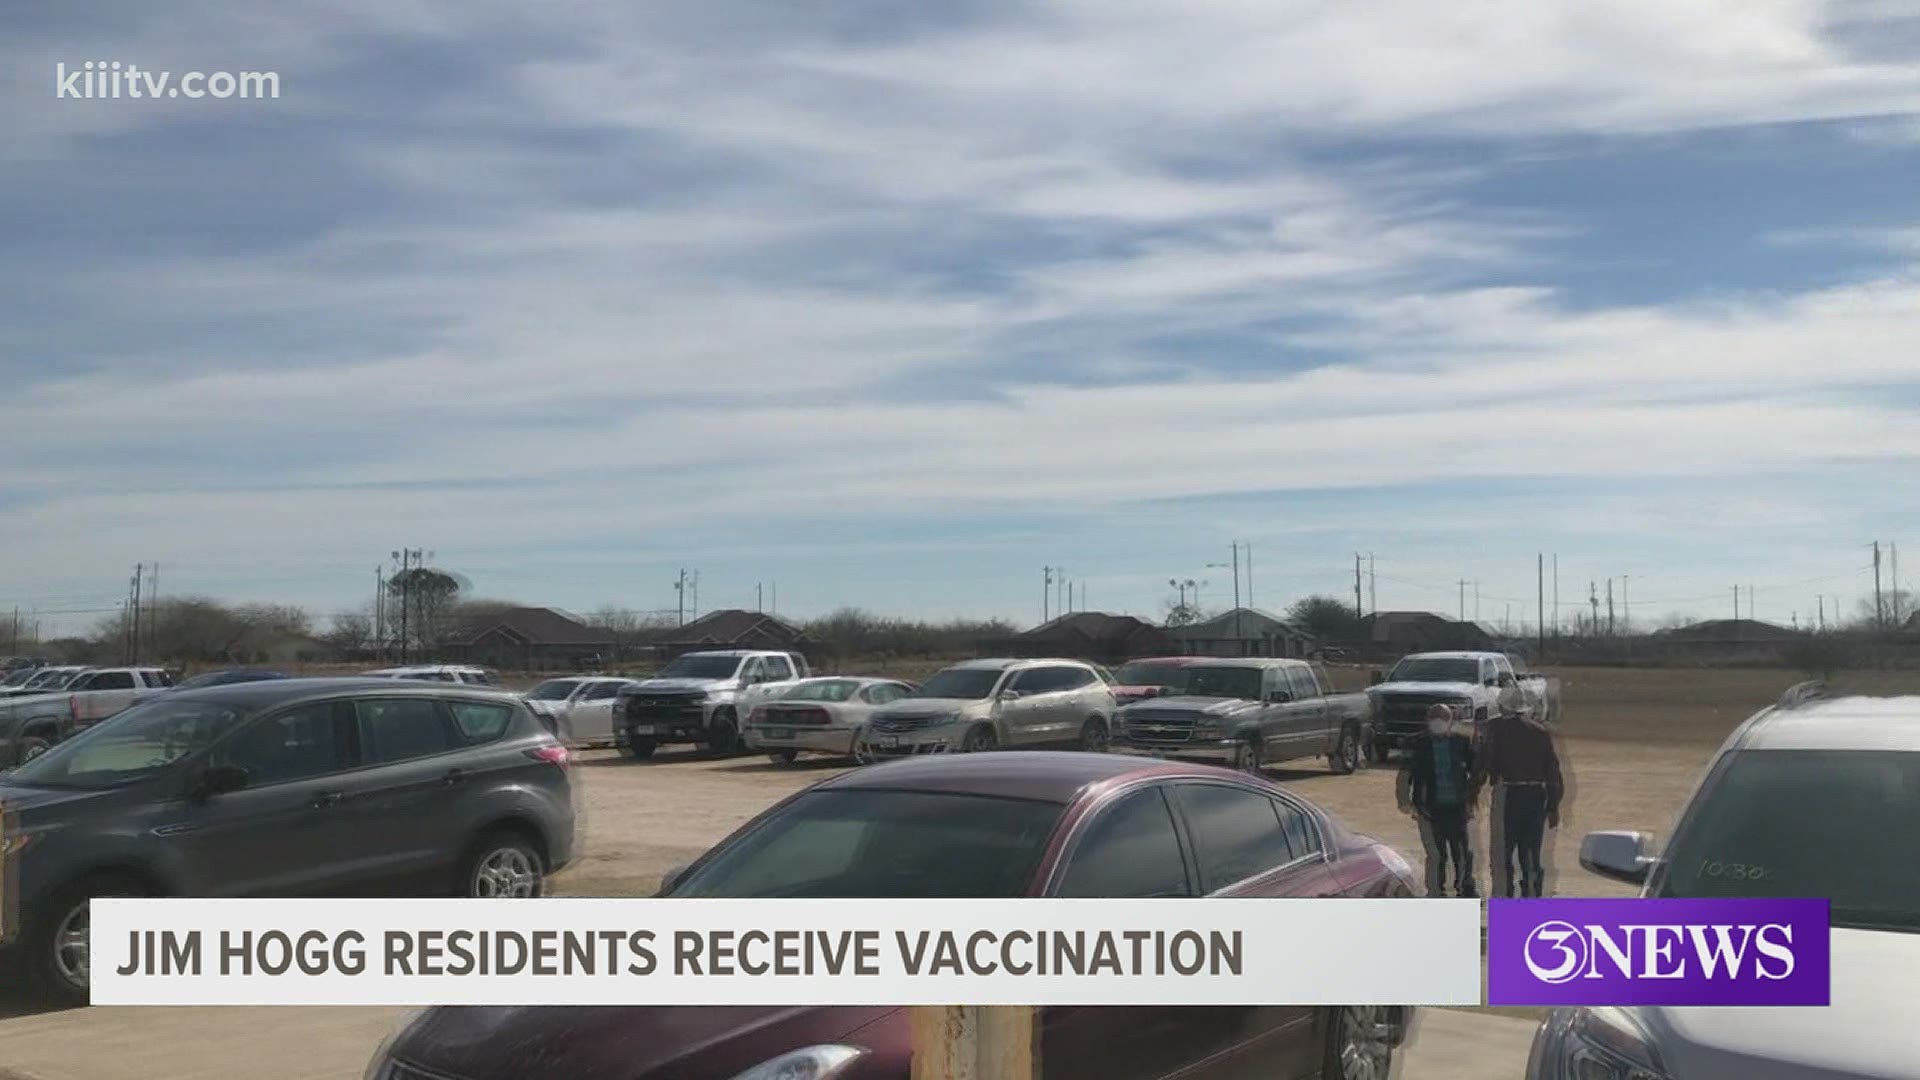 If residents want to sign up to get on the county's vaccination list, they need to call Judge Guerra's office at 361-527-3015.